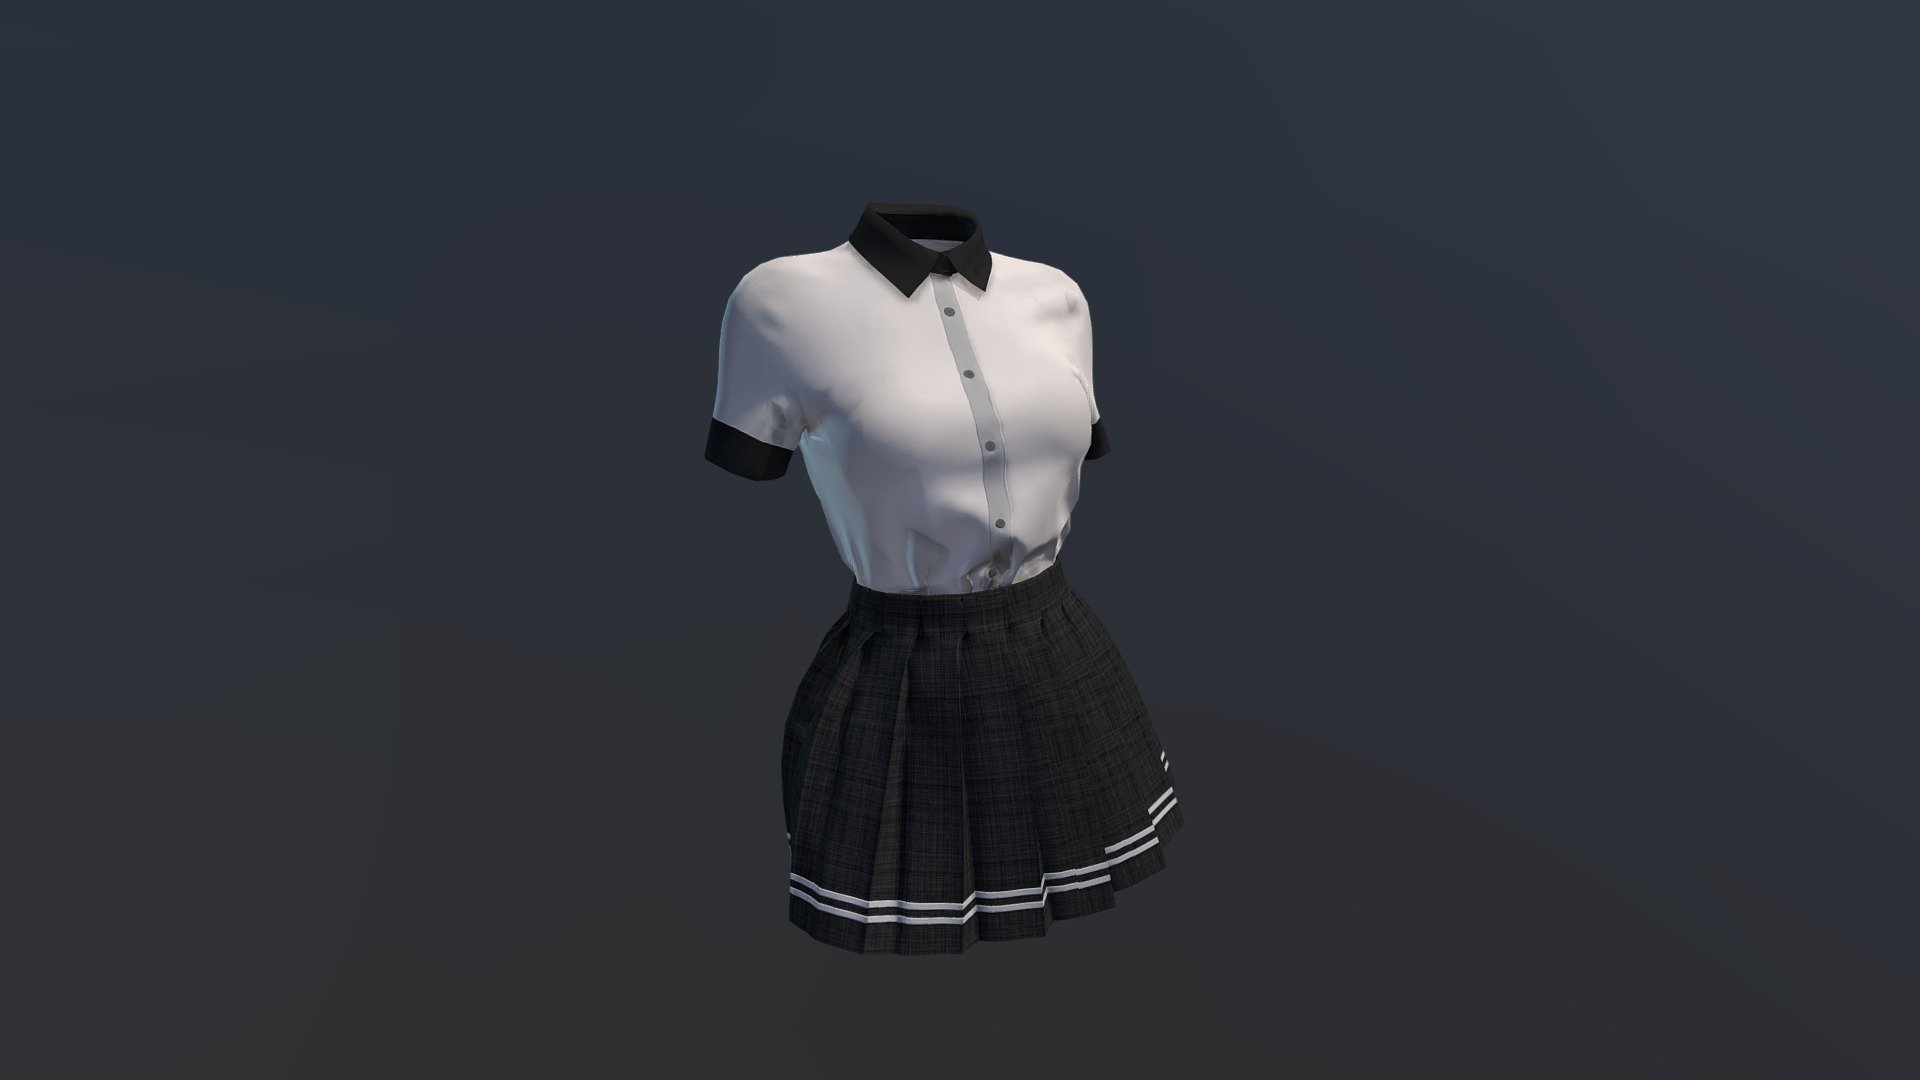 Included:
Marvelous Designer files (Simulate)
Apose Model
Posed Model
Maya files (Retopology)
Bake Textures
Both clean textures and bloody/apocalypse version textures
Blender file (Render)
Marmoset Toolbag scene(Bake and Render)

My workflow practice on a Japanese school uniform.
Mainly for practicing the retopology workflow.

Simulated in Marvelous Designer
Retopology in Maya
Textured in Substance Painter
Bake and Render in Marmoset Toolbag - Japanese School Uniform - Buy Royalty Free 3D model by Oniigirii 3d model